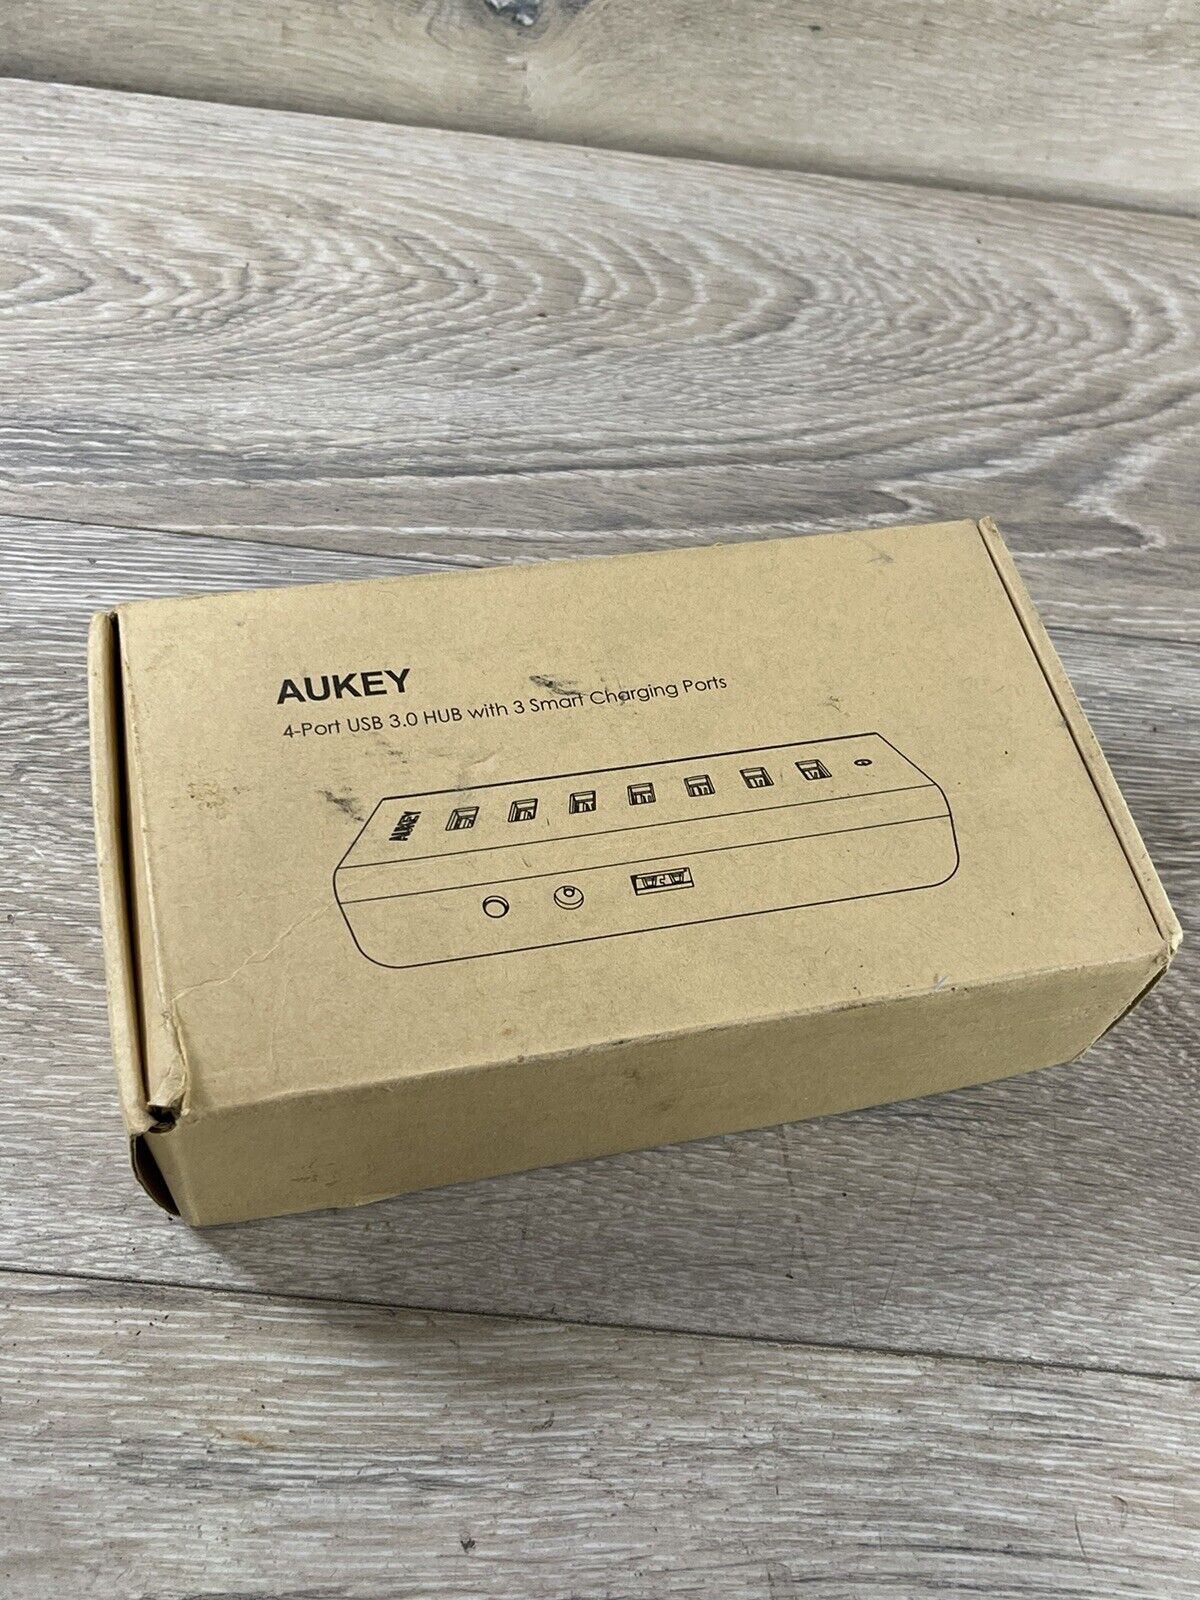 AUKEY CB-H19 Powered USB Hub with 3 Charging Ports and 4 USB 3.0 Data